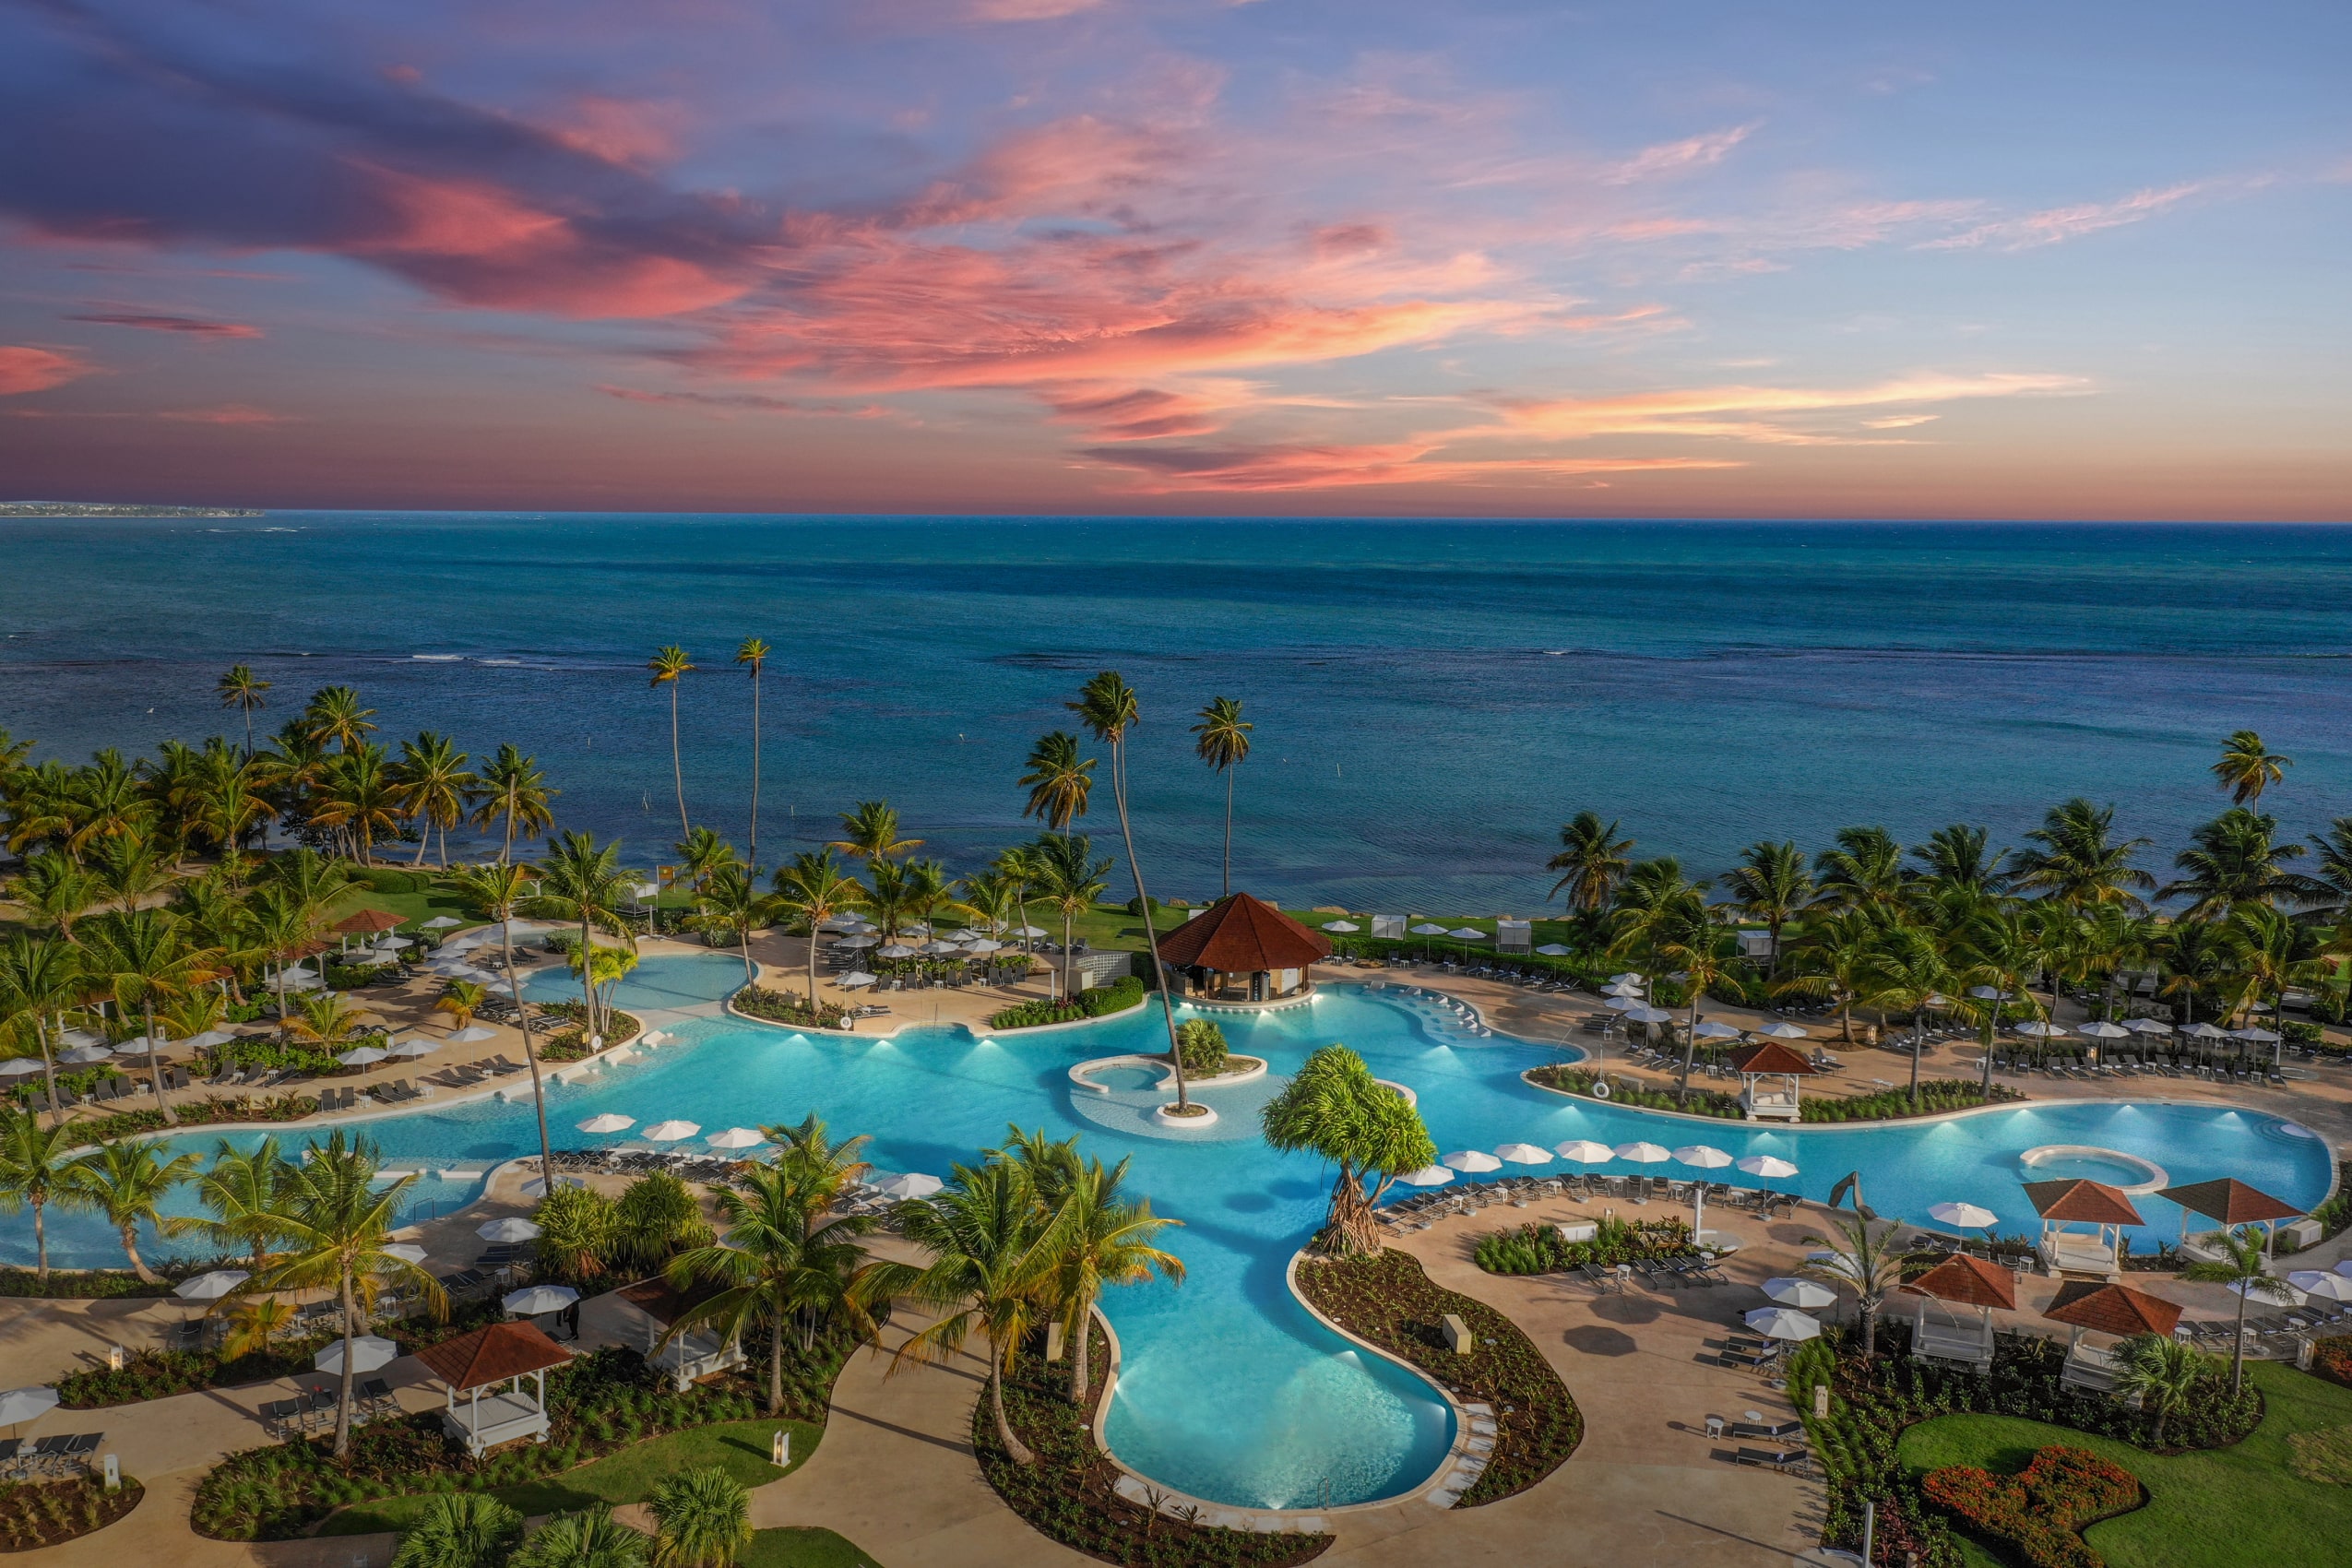 A breathtaking aerial view of Grand Reserve at dusk, showcasing the resort's expansive pool complex with swaying palm trees and the serene Caribbean Sea in the background, under a sky painted with vibrant hues of sunset